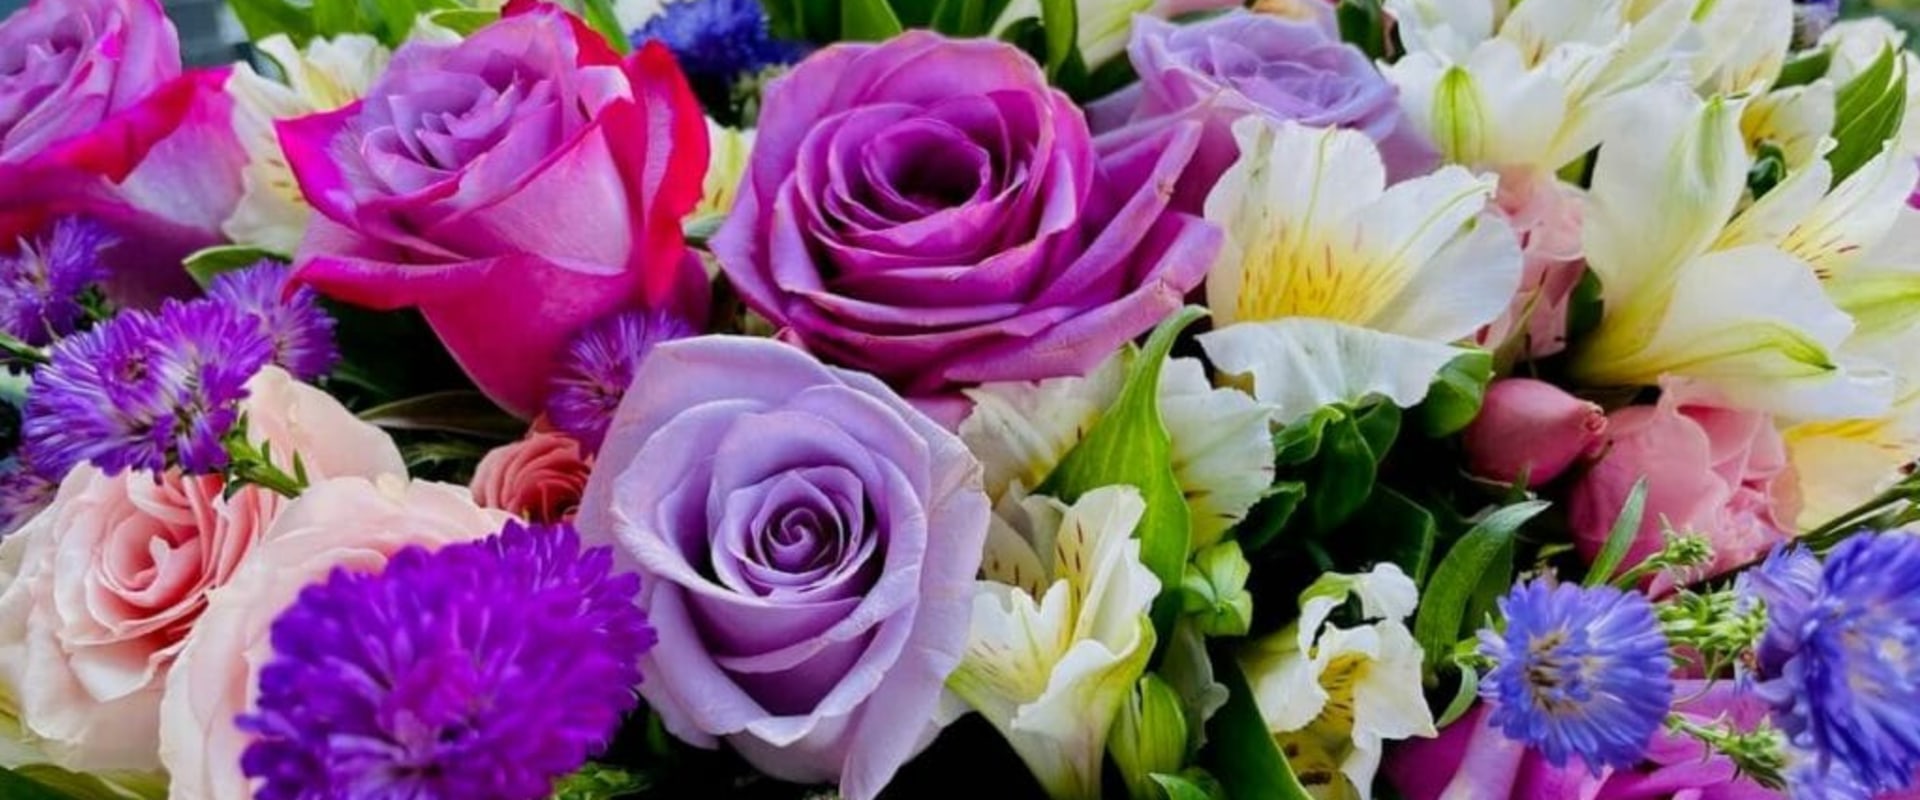 Discounts and Special Offers for Teachers: Get the Best Value for Your Money at Oklahoma City Florists